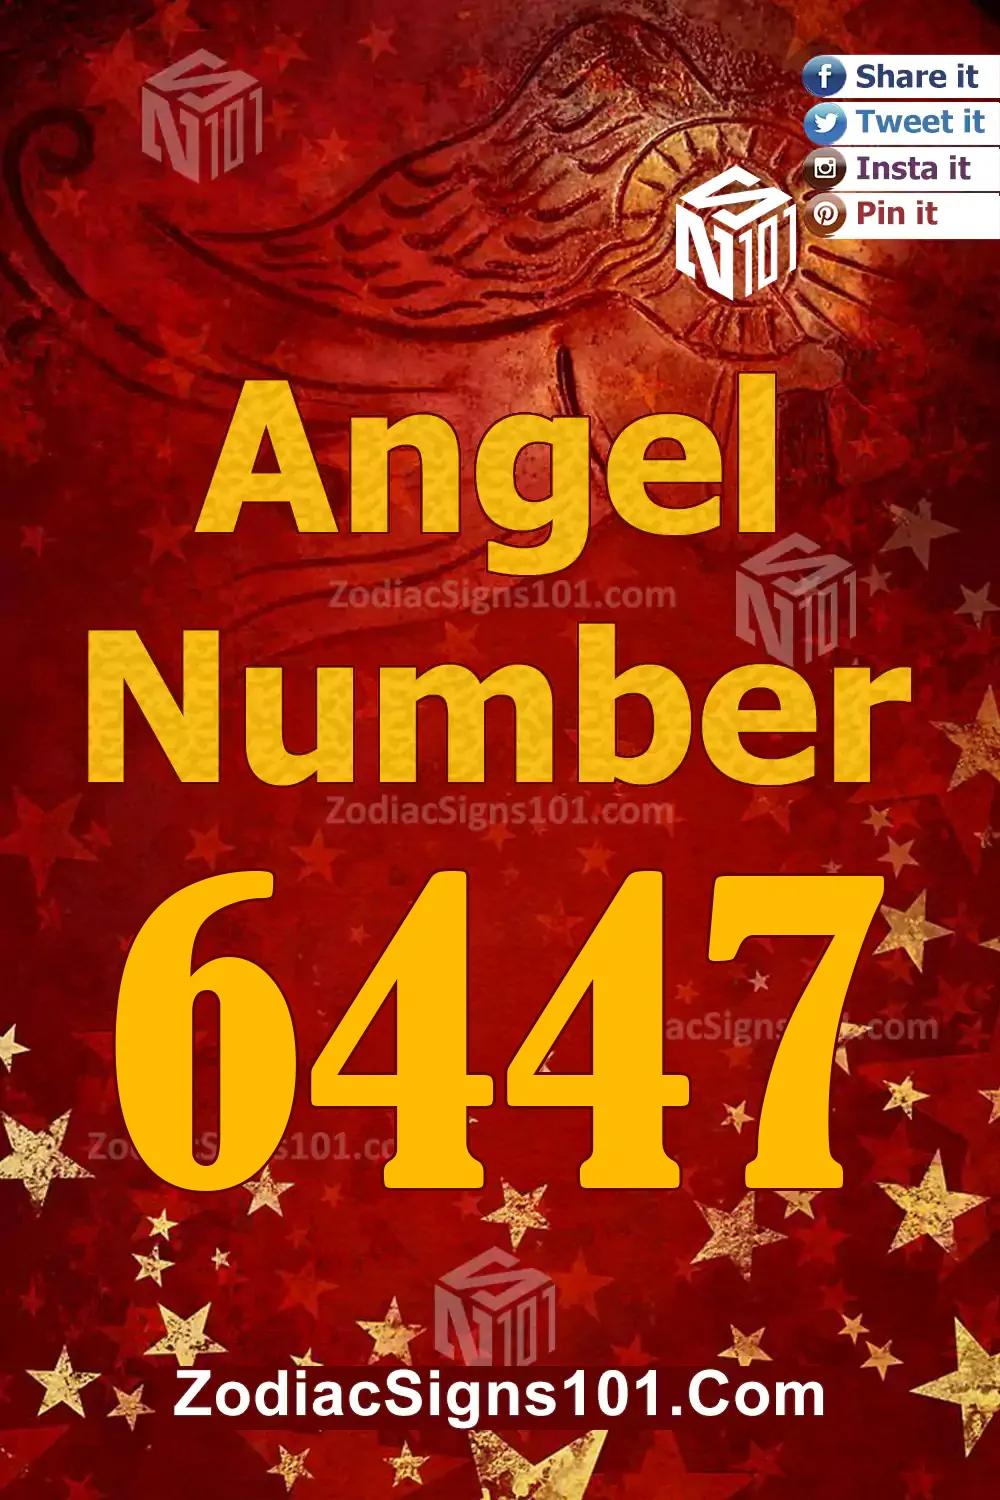 6447 Angel Number Meaning